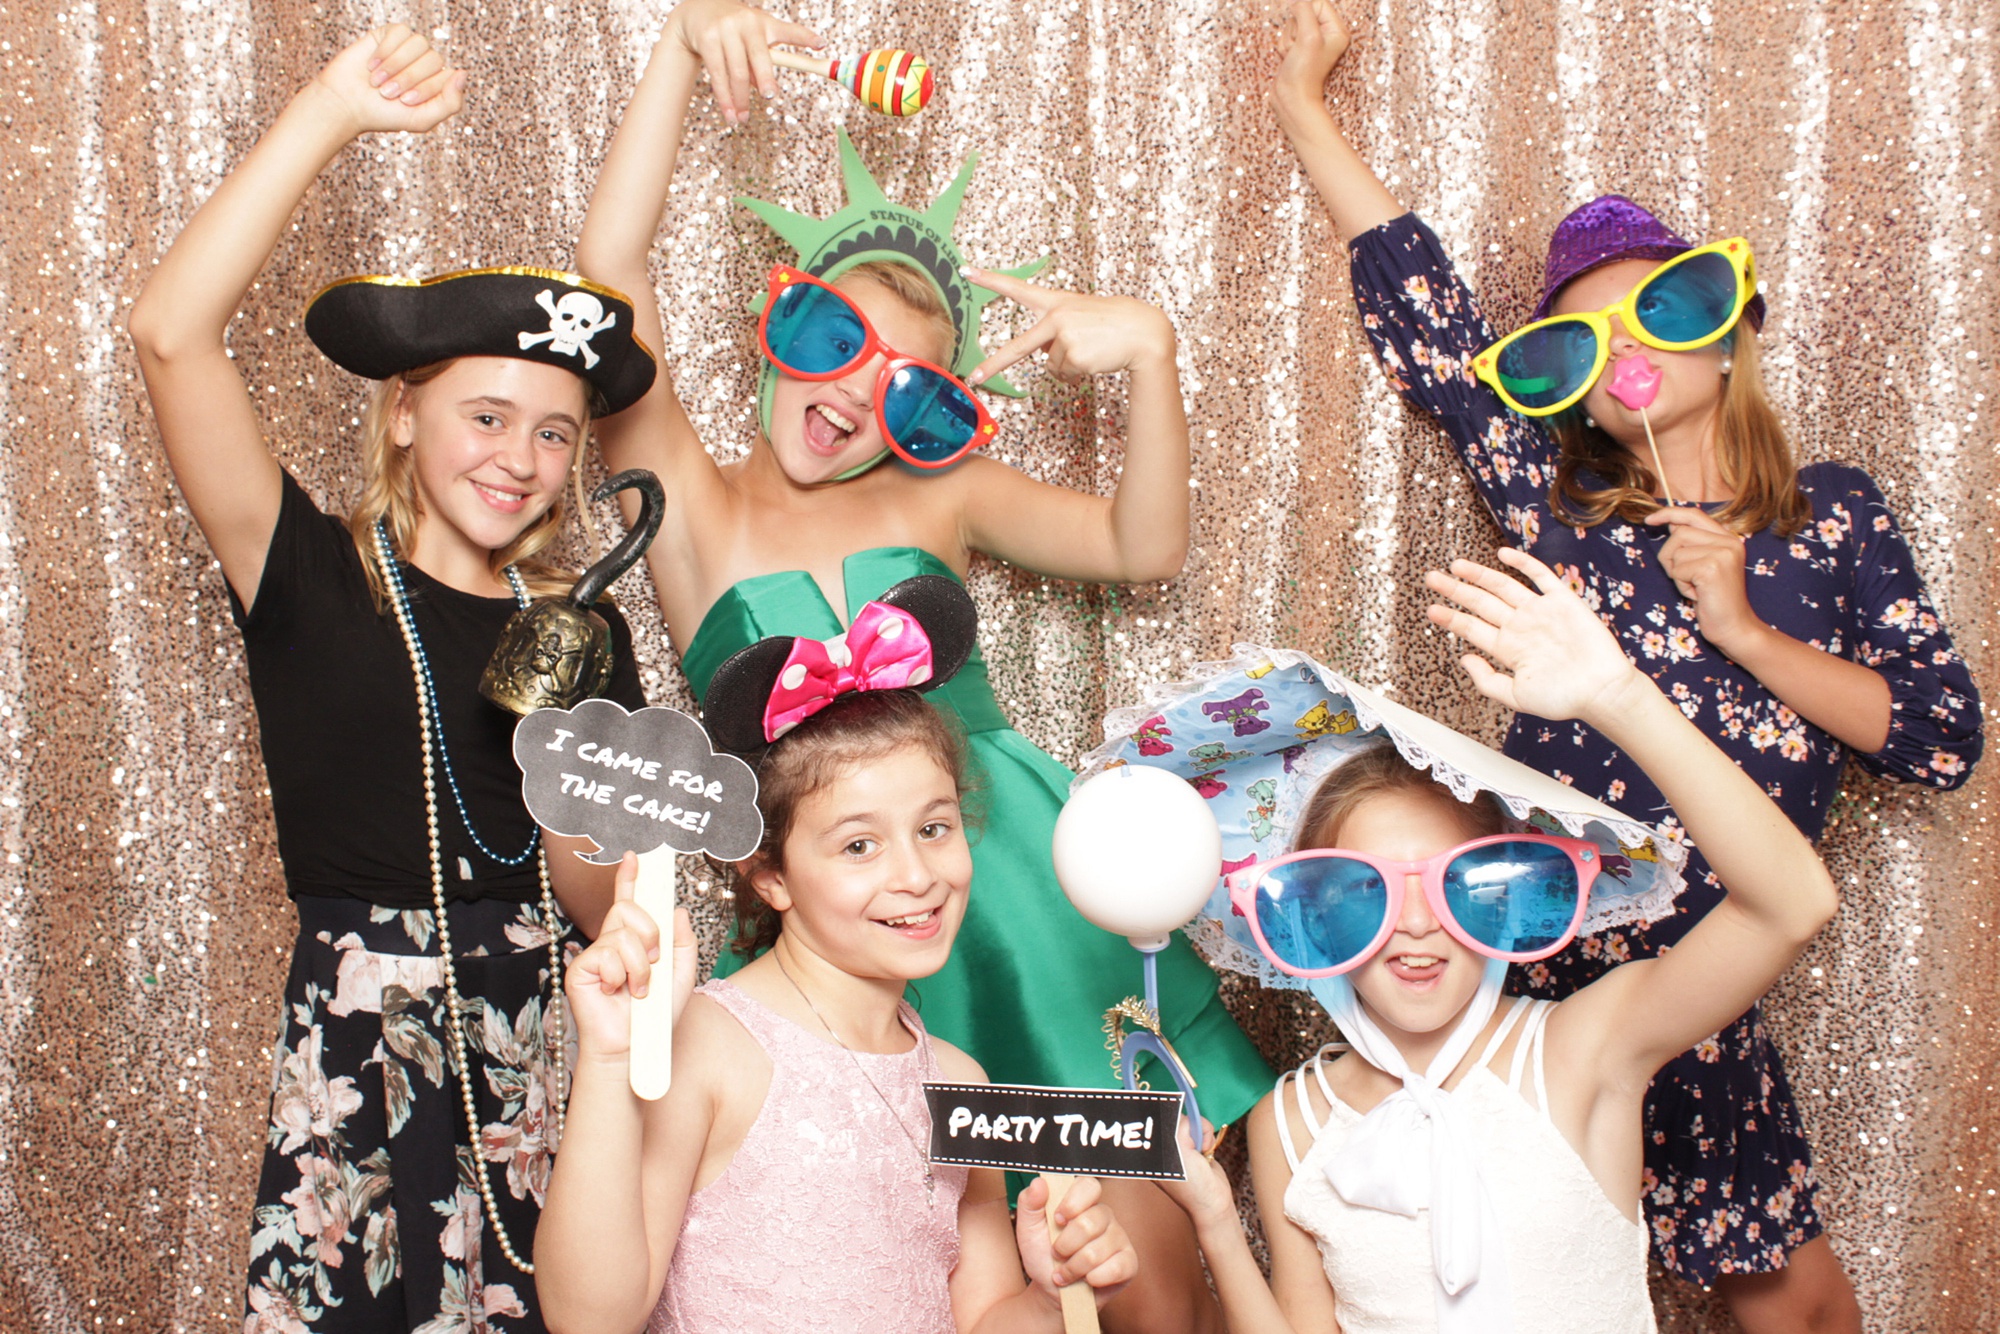 family fun in photo booth during NJ wedding reception